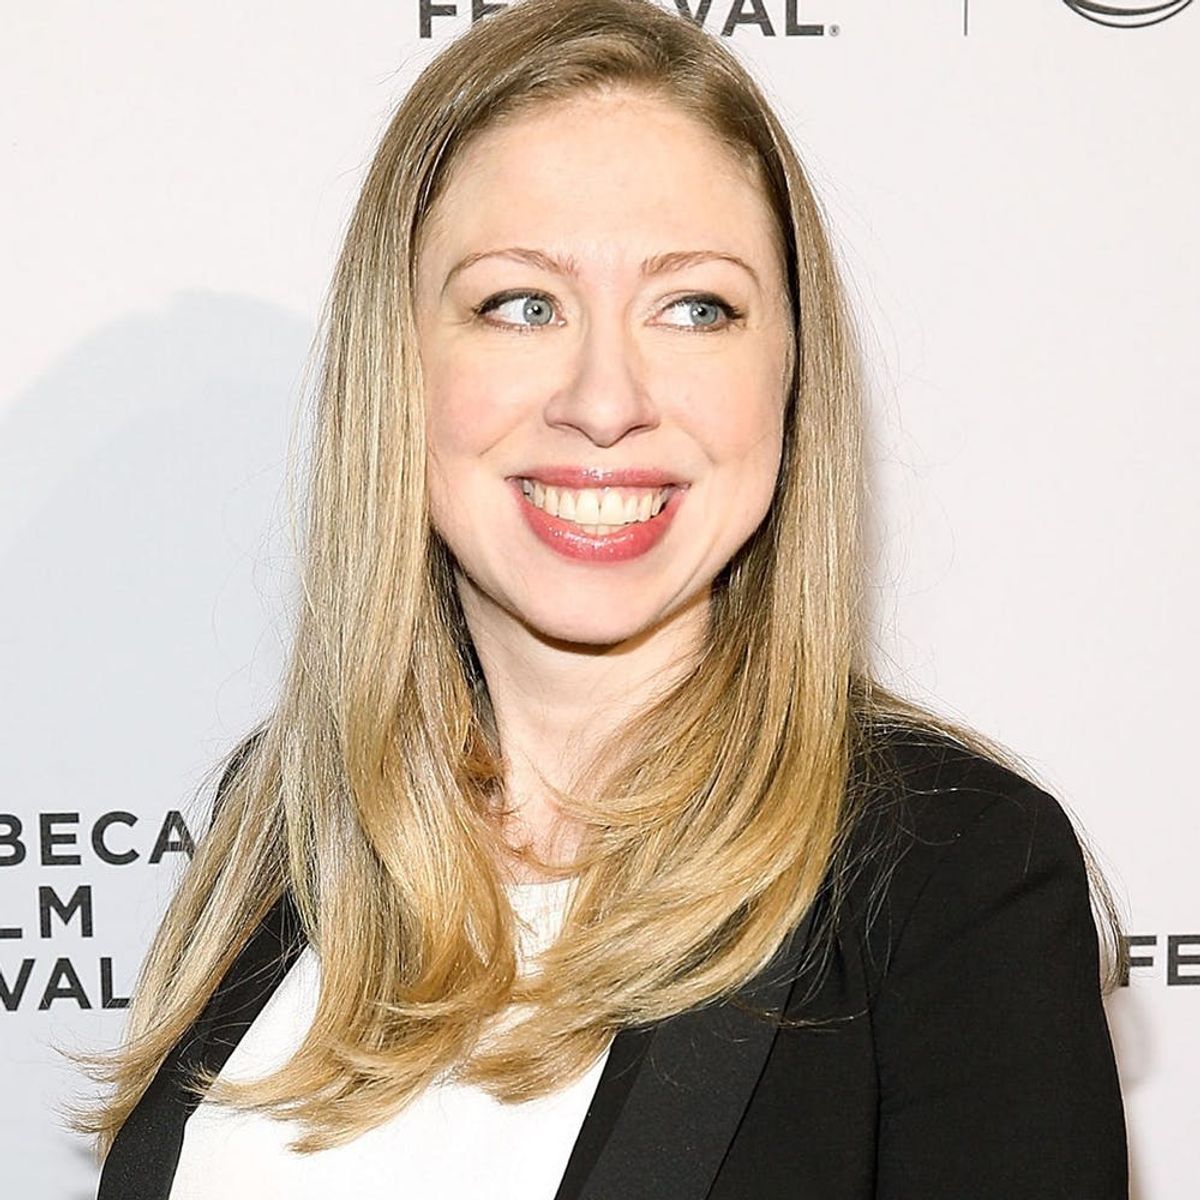 Chelsea Clinton Just Announced She’s Pregnant With Her Second Baby in the Sweetest Way